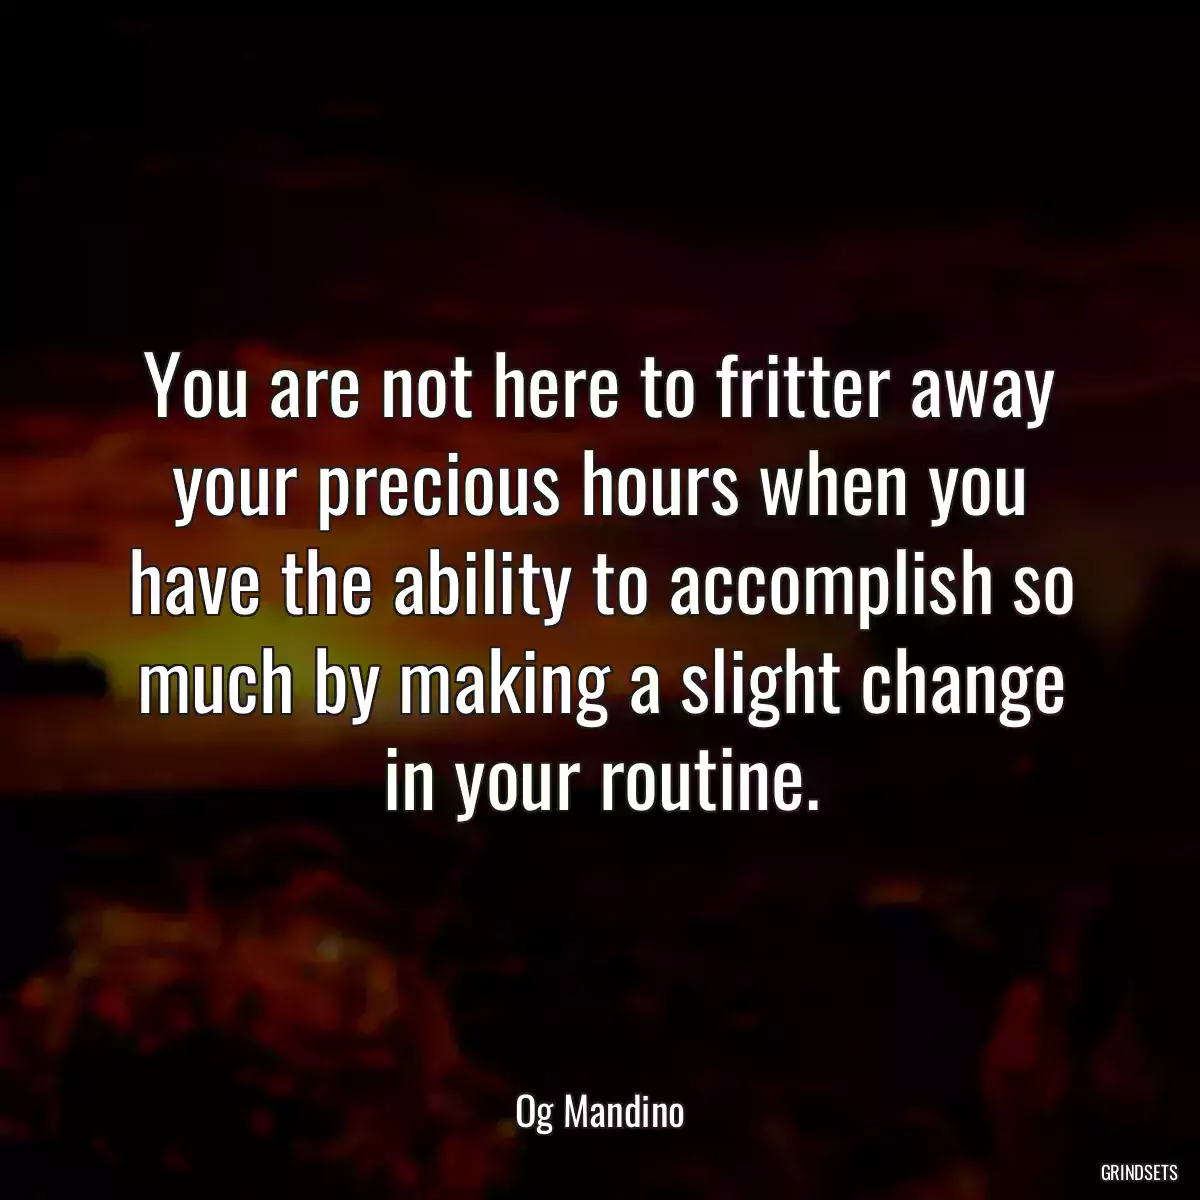 You are not here to fritter away your precious hours when you have the ability to accomplish so much by making a slight change in your routine.